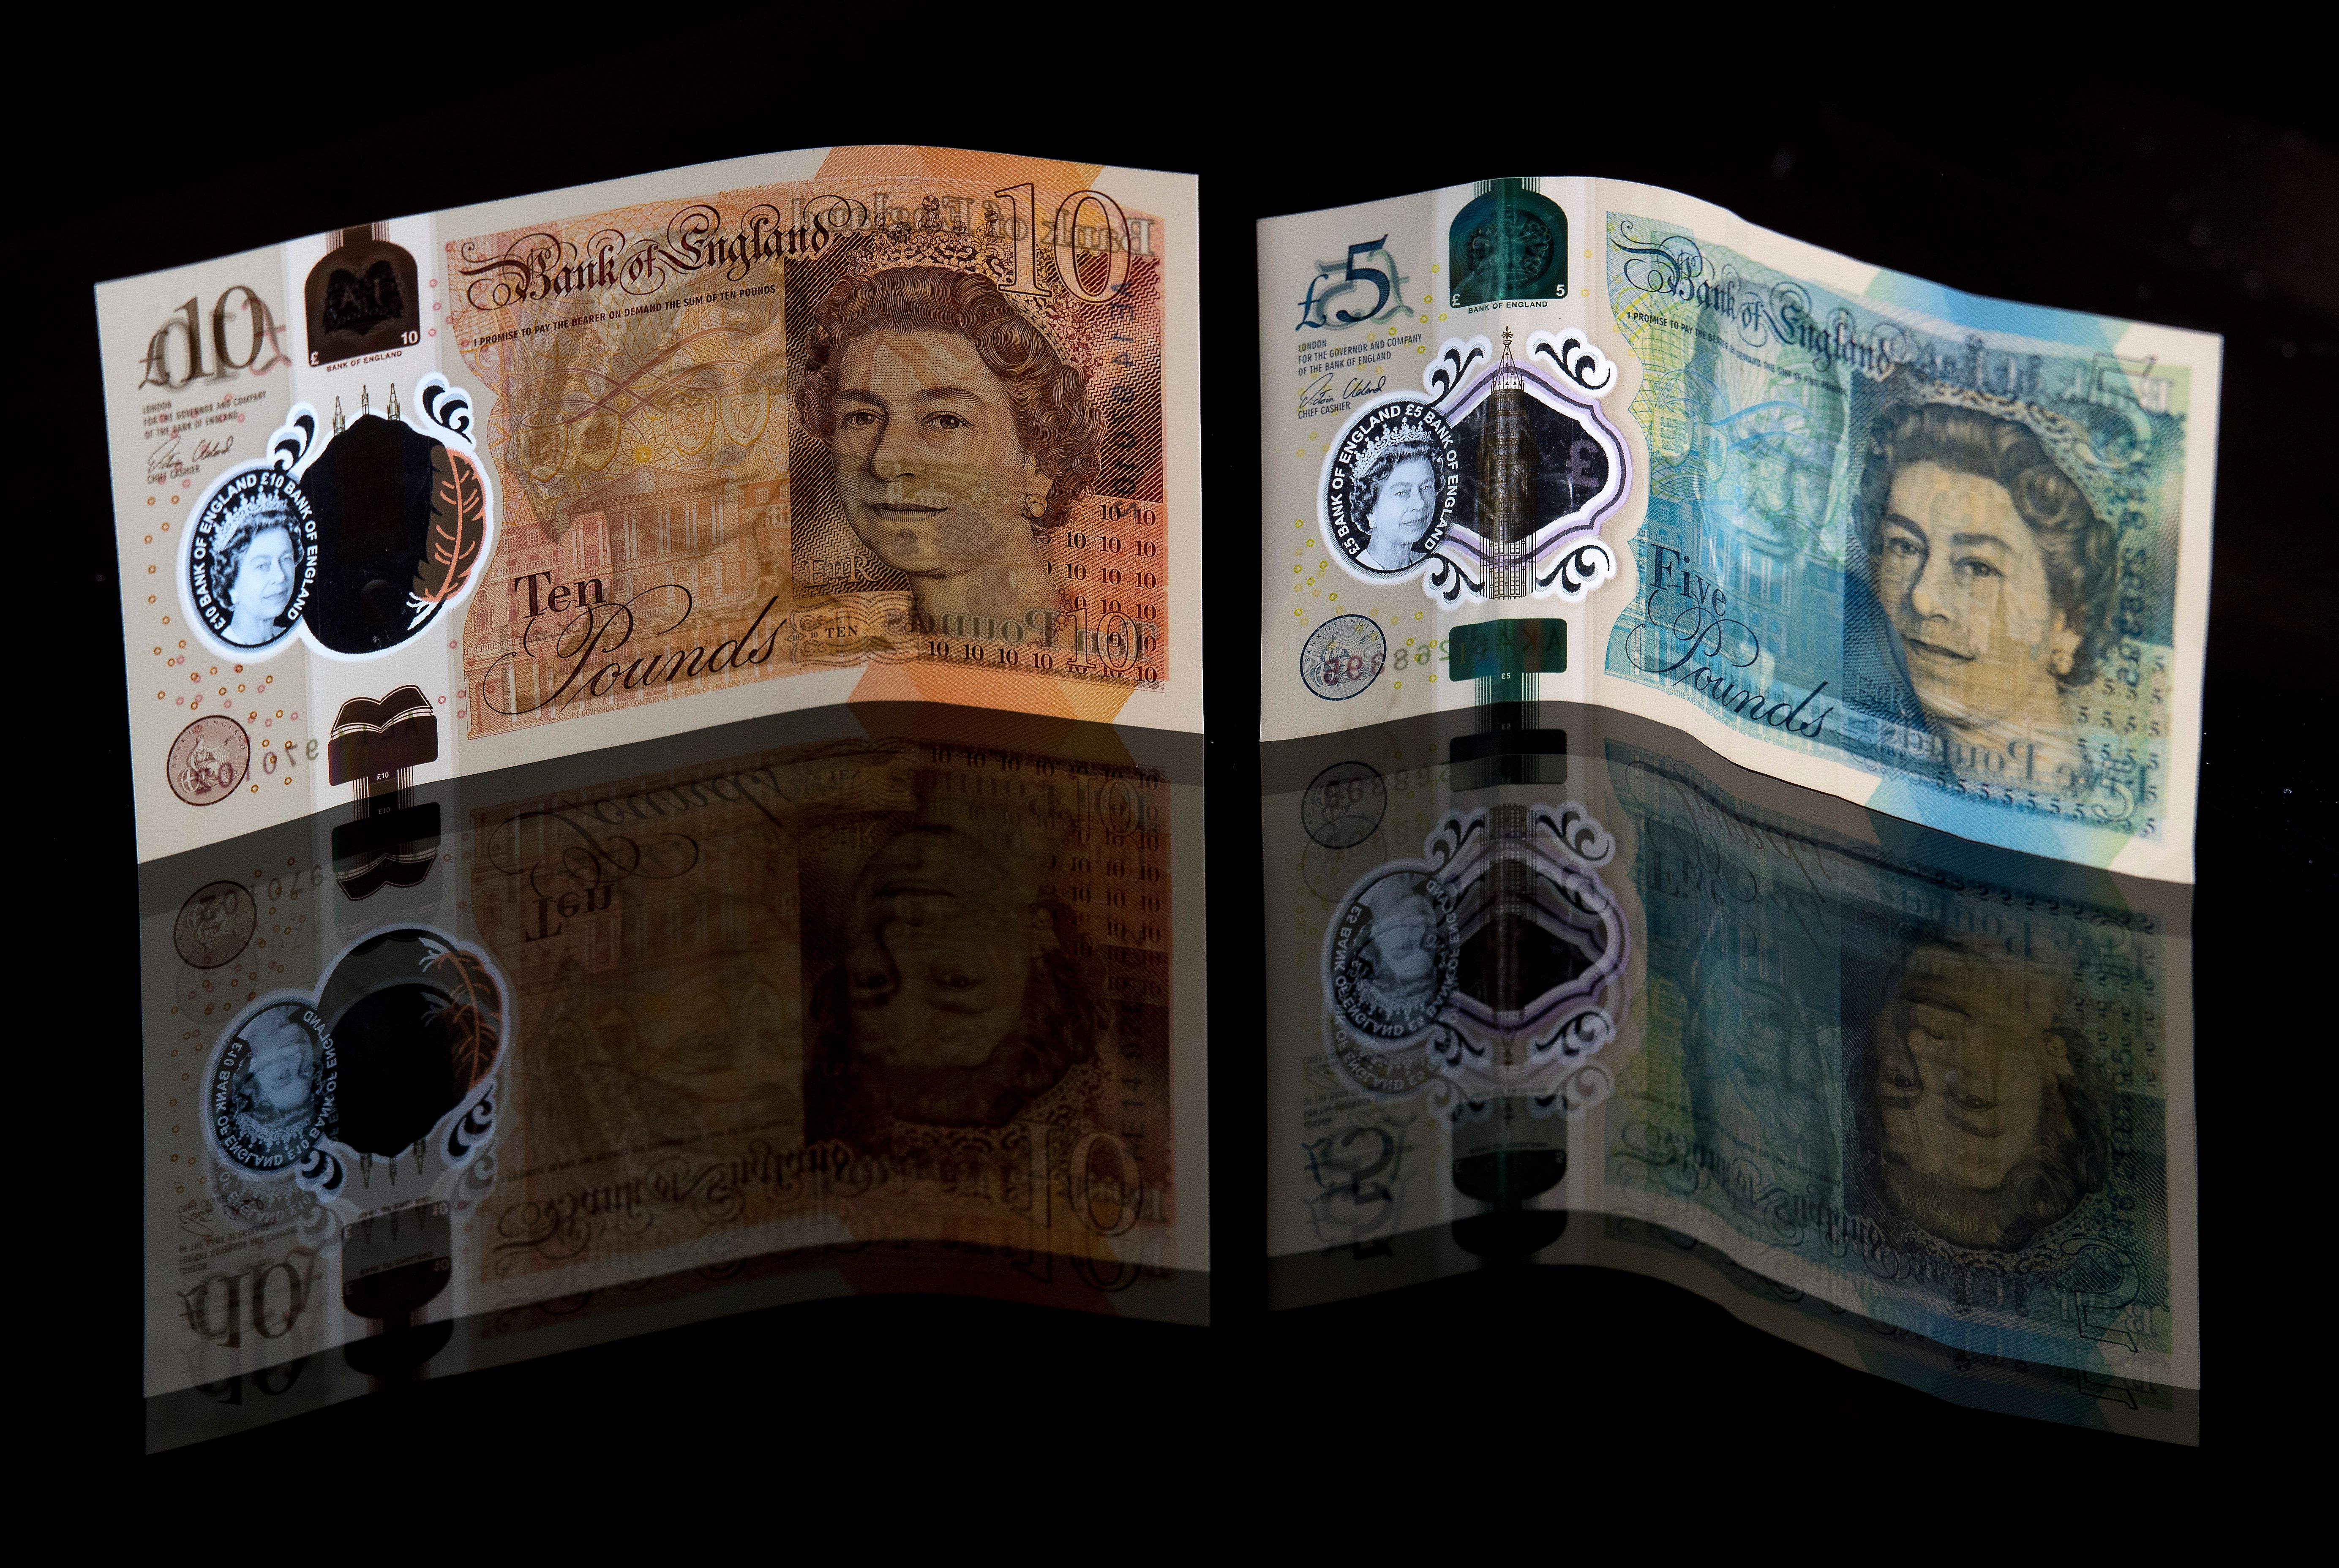  British 10-pound sterling and five-pound sterling note are arranged for a photograph.